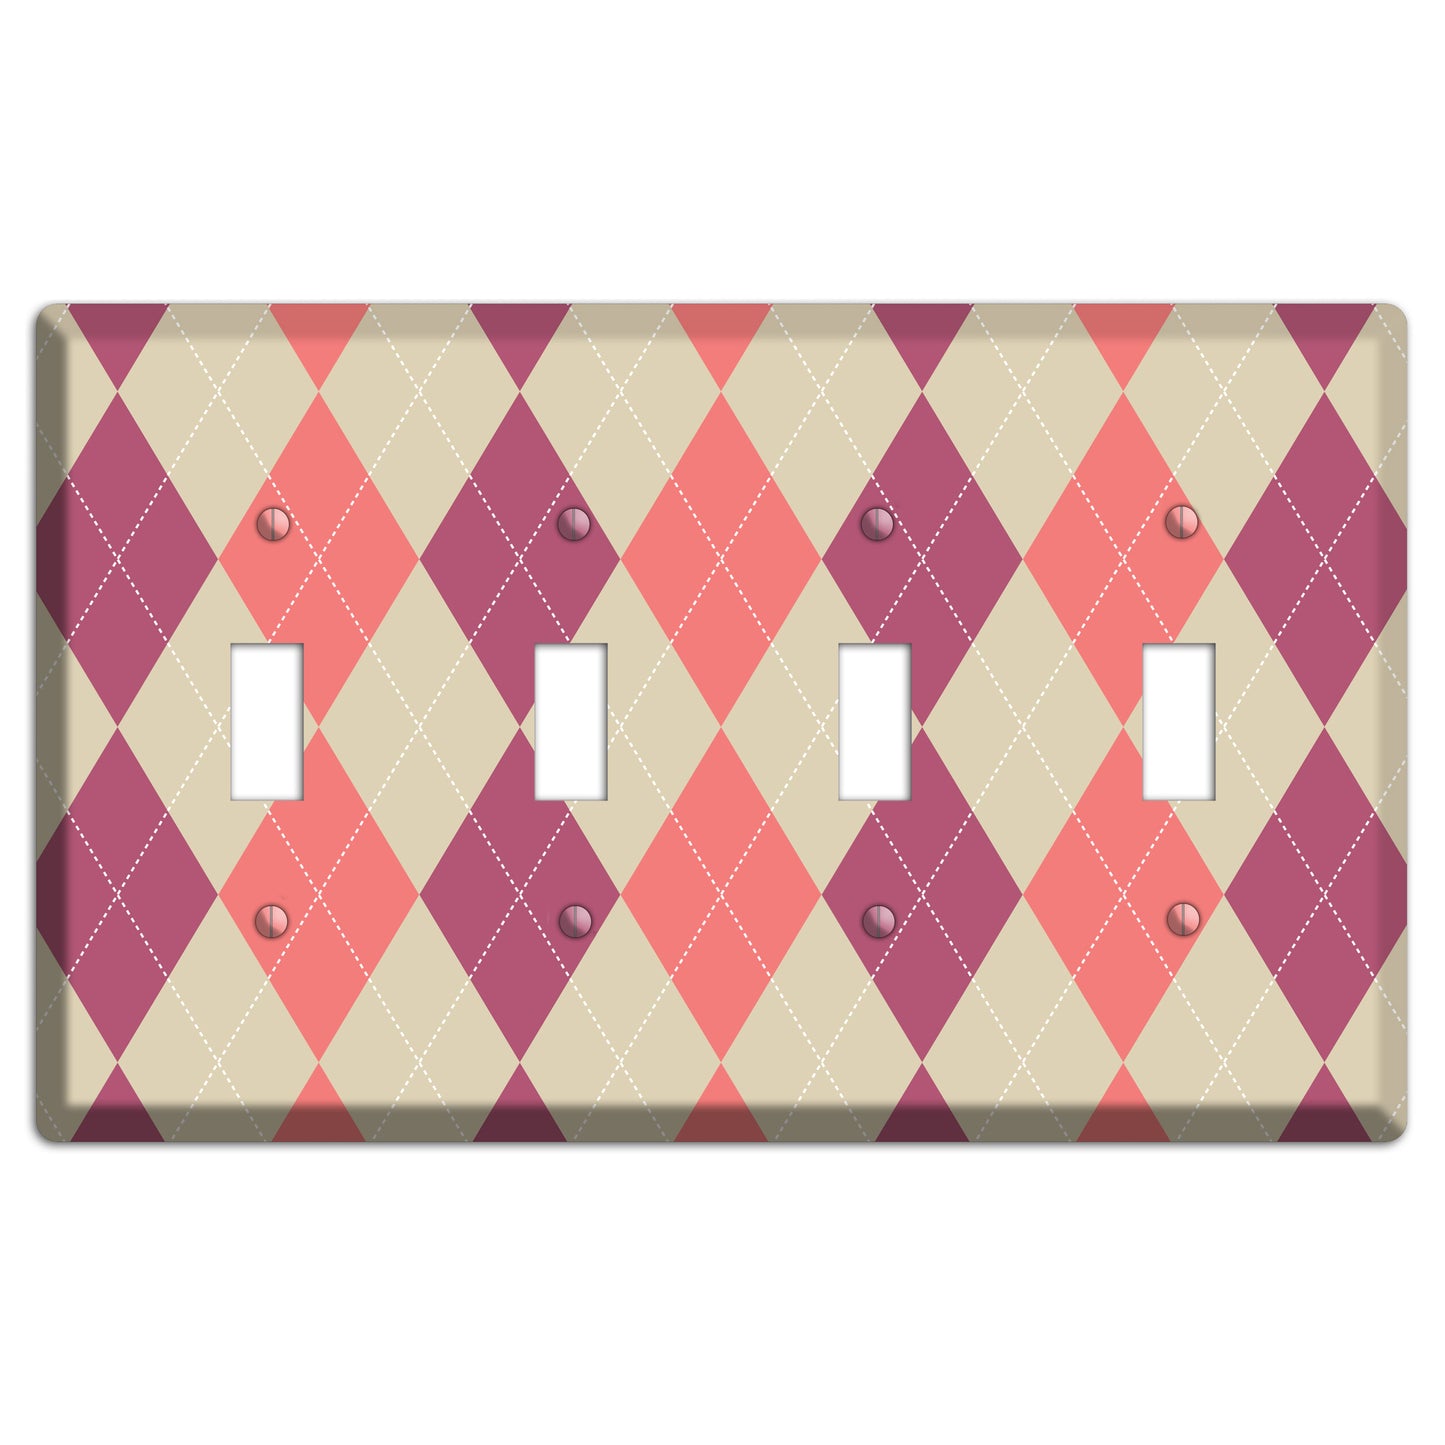 Pink and Tan Argyle 4 Toggle Wallplate